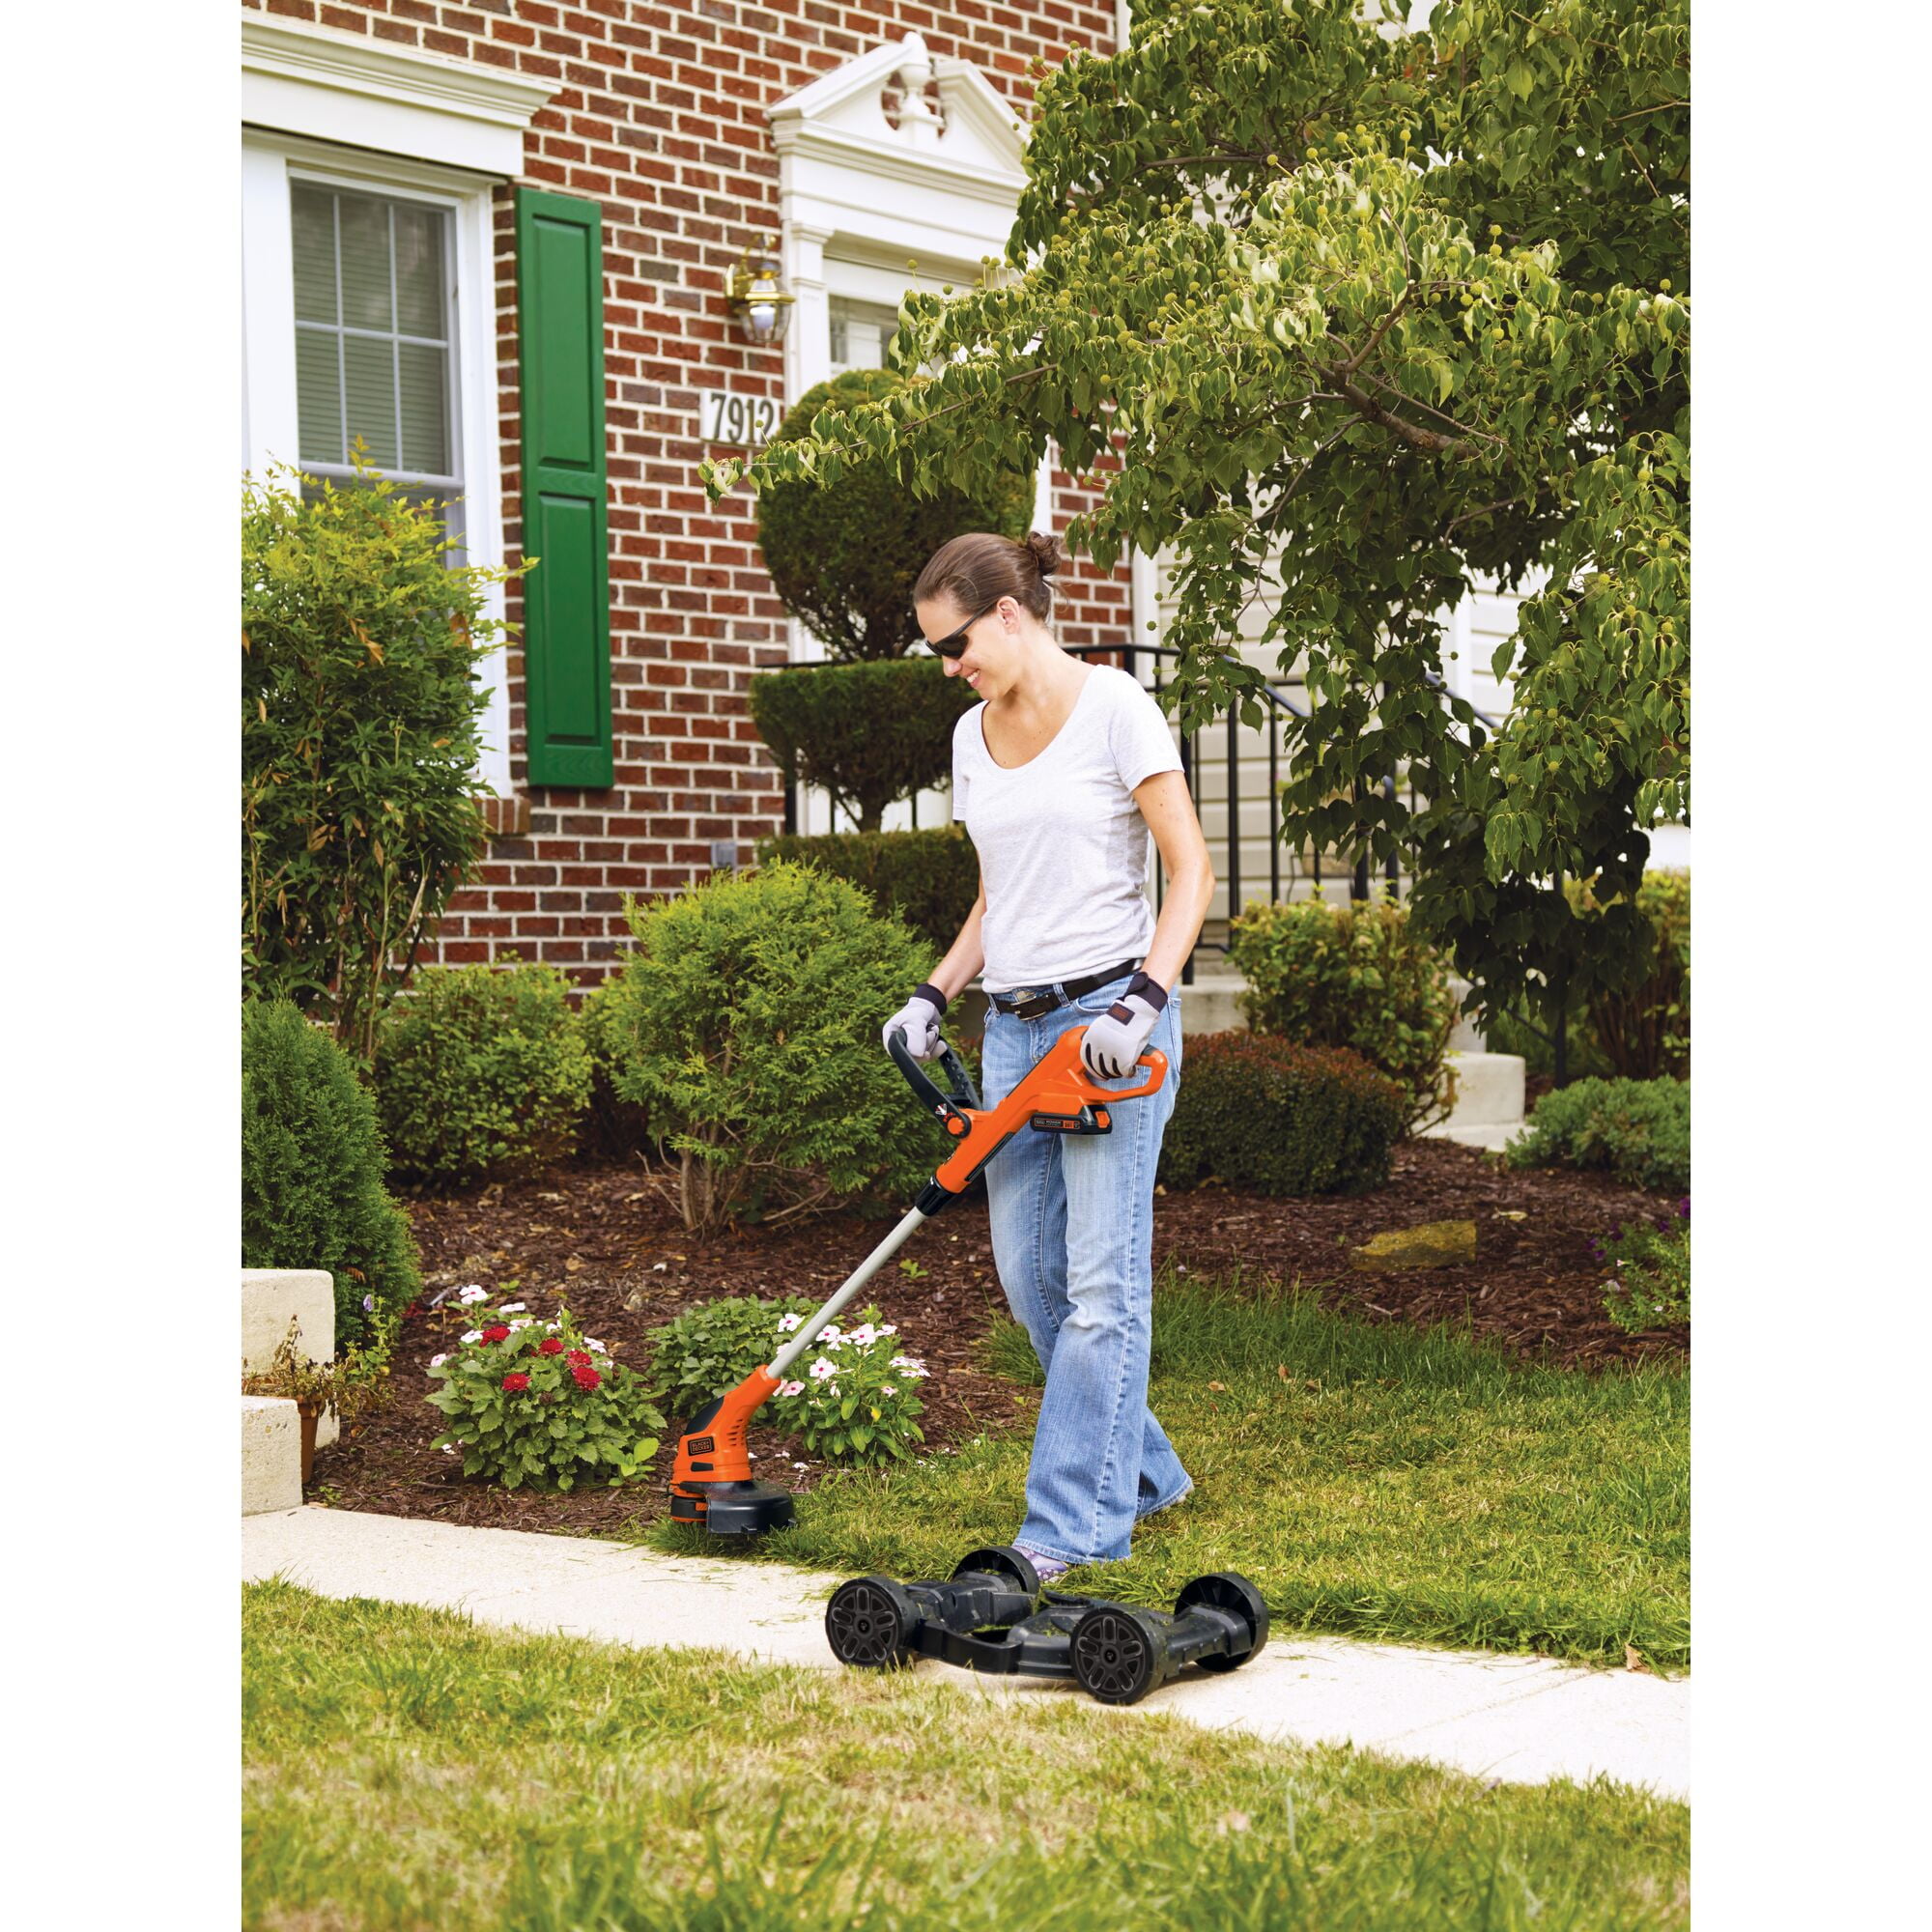 BLACK+DECKER 20V MAX Cordless 12 Lithium-Ion 3-in-1 Trimmer/Edger and  Mower + 2 Batteries